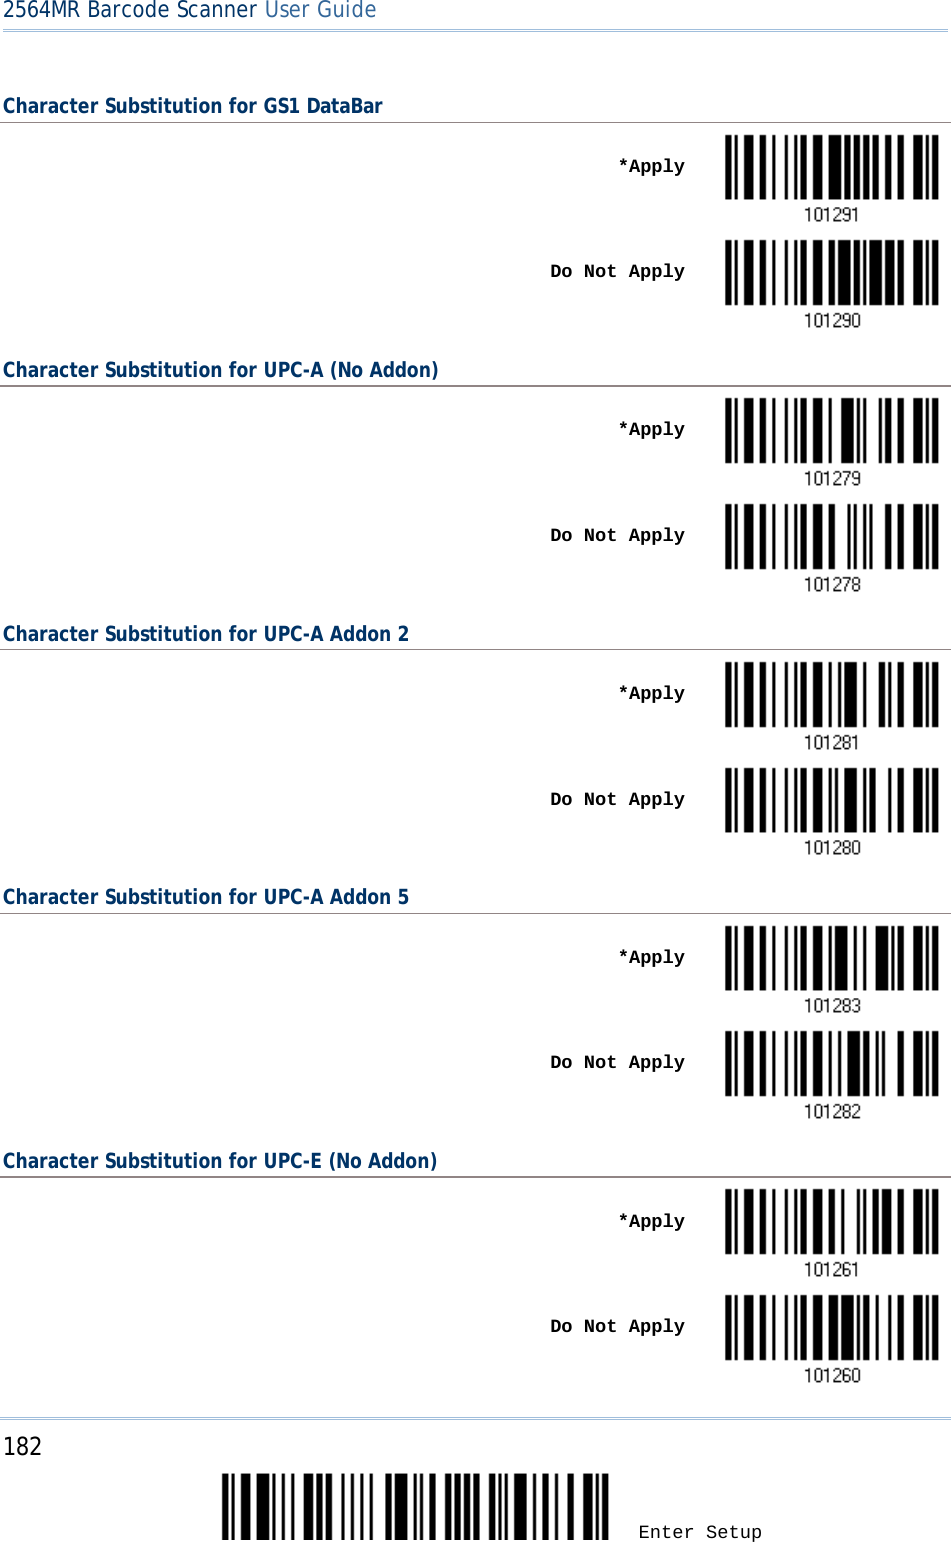 2564MR Barcode Scanner User Guide  Character Substitution for GS1 DataBar    *Apply     Do Not Apply  Character Substitution for UPC-A (No Addon)    *Apply     Do Not Apply  Character Substitution for UPC-A Addon 2    *Apply     Do Not Apply  Character Substitution for UPC-A Addon 5    *Apply     Do Not Apply  Character Substitution for UPC-E (No Addon)    *Apply     Do Not Apply  182 Enter Setup 